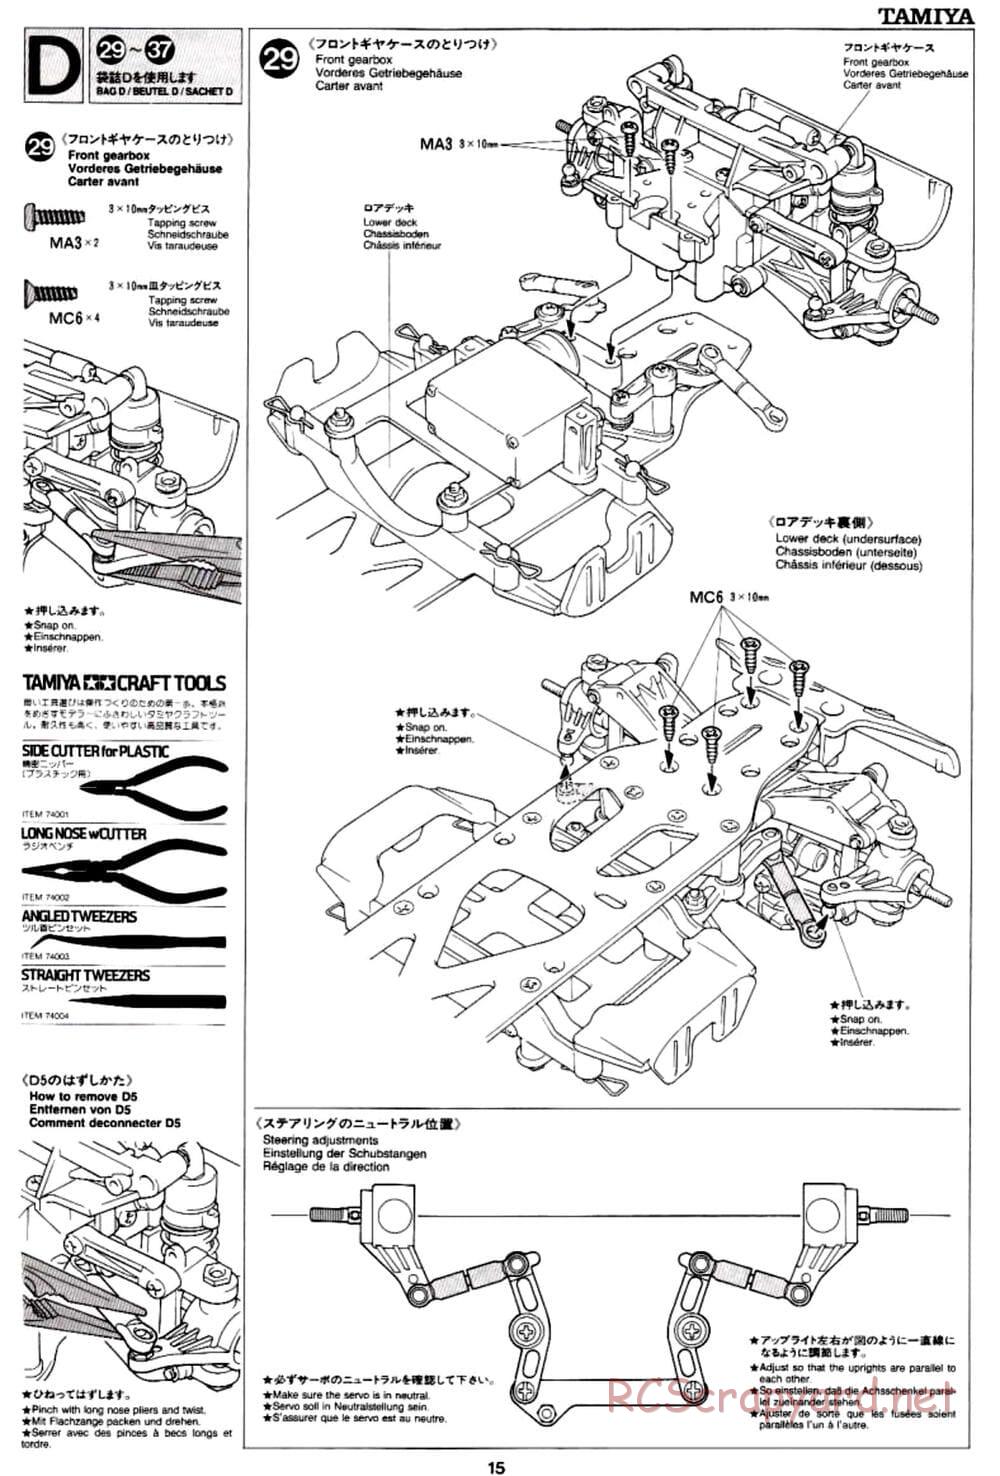 Tamiya - TA-03R TRF Special Edition Chassis - Manual - Page 15